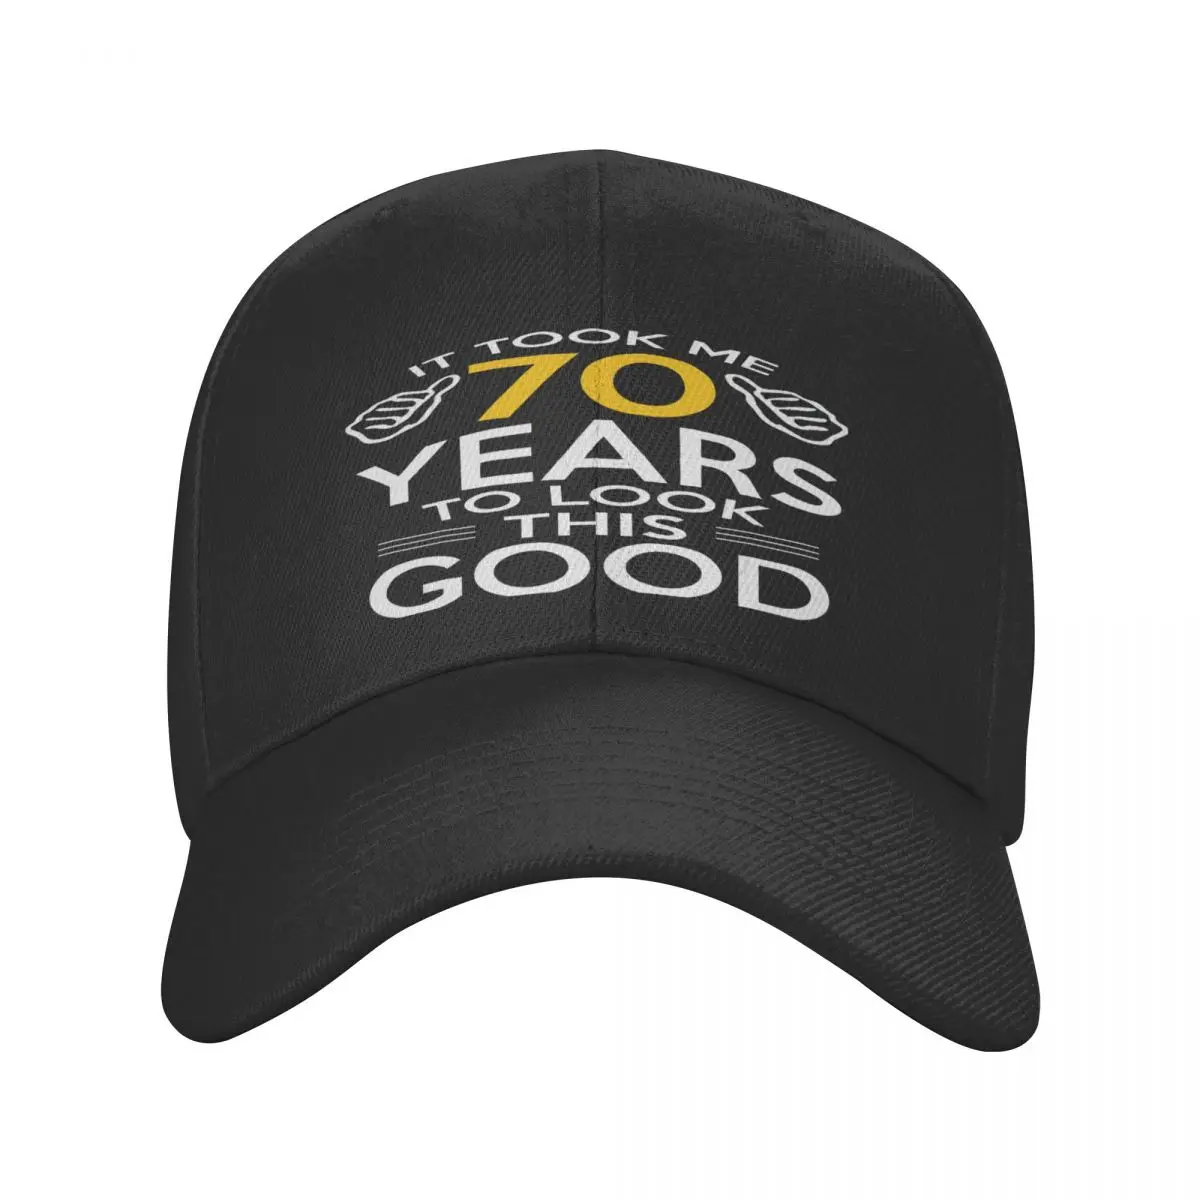 

70th Birthday Gift Took Me 70 Years Casquette, Polyester Cap Fashionable Moisture Wicking Travel Nice Gift